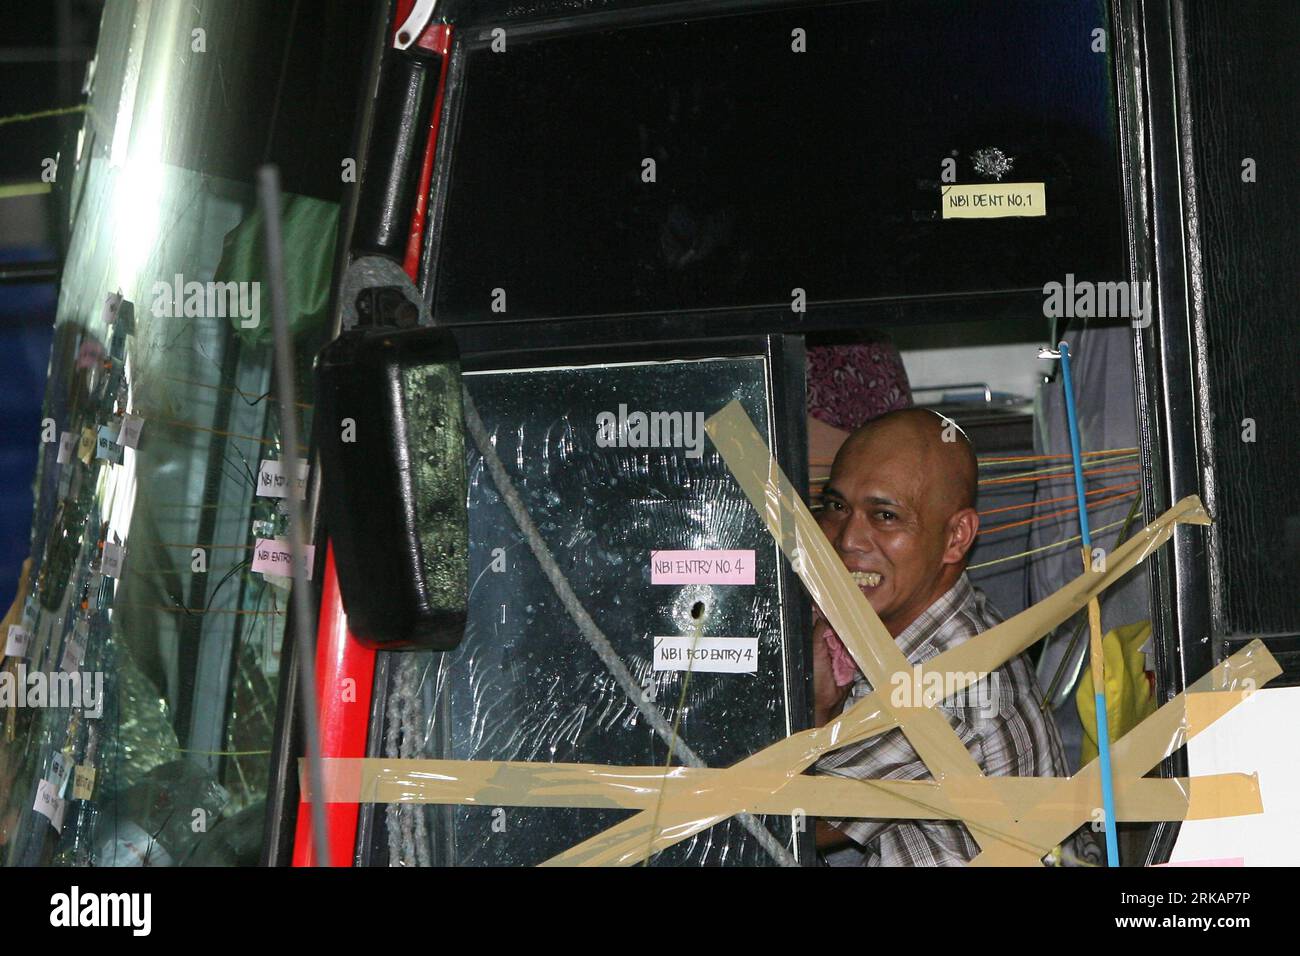 Bildnummer: 54411842  Datum: 08.09.2010  Copyright: imago/Xinhua 100908) -- MANILA, Sept. 8, 2010 (Xinhua) -- Alberto Lubang, the driver of the tourist bus, in which dismissed Policeman Rolando Mendoza held hostage on Aug. 23, wipes his face as he recounts the violent incident during an occular inspection with the members of the Incident Investigation and Review Committee(IIRC) inside the Ordnance Warehouse at the Camp Bagong Diwa in Taguig City, the Philippines Sept. 8, 2010. The IIRC held the inspection to investigate the hostage crisis that killed eight tourists of China s Hong Kong on Aug. Stock Photo